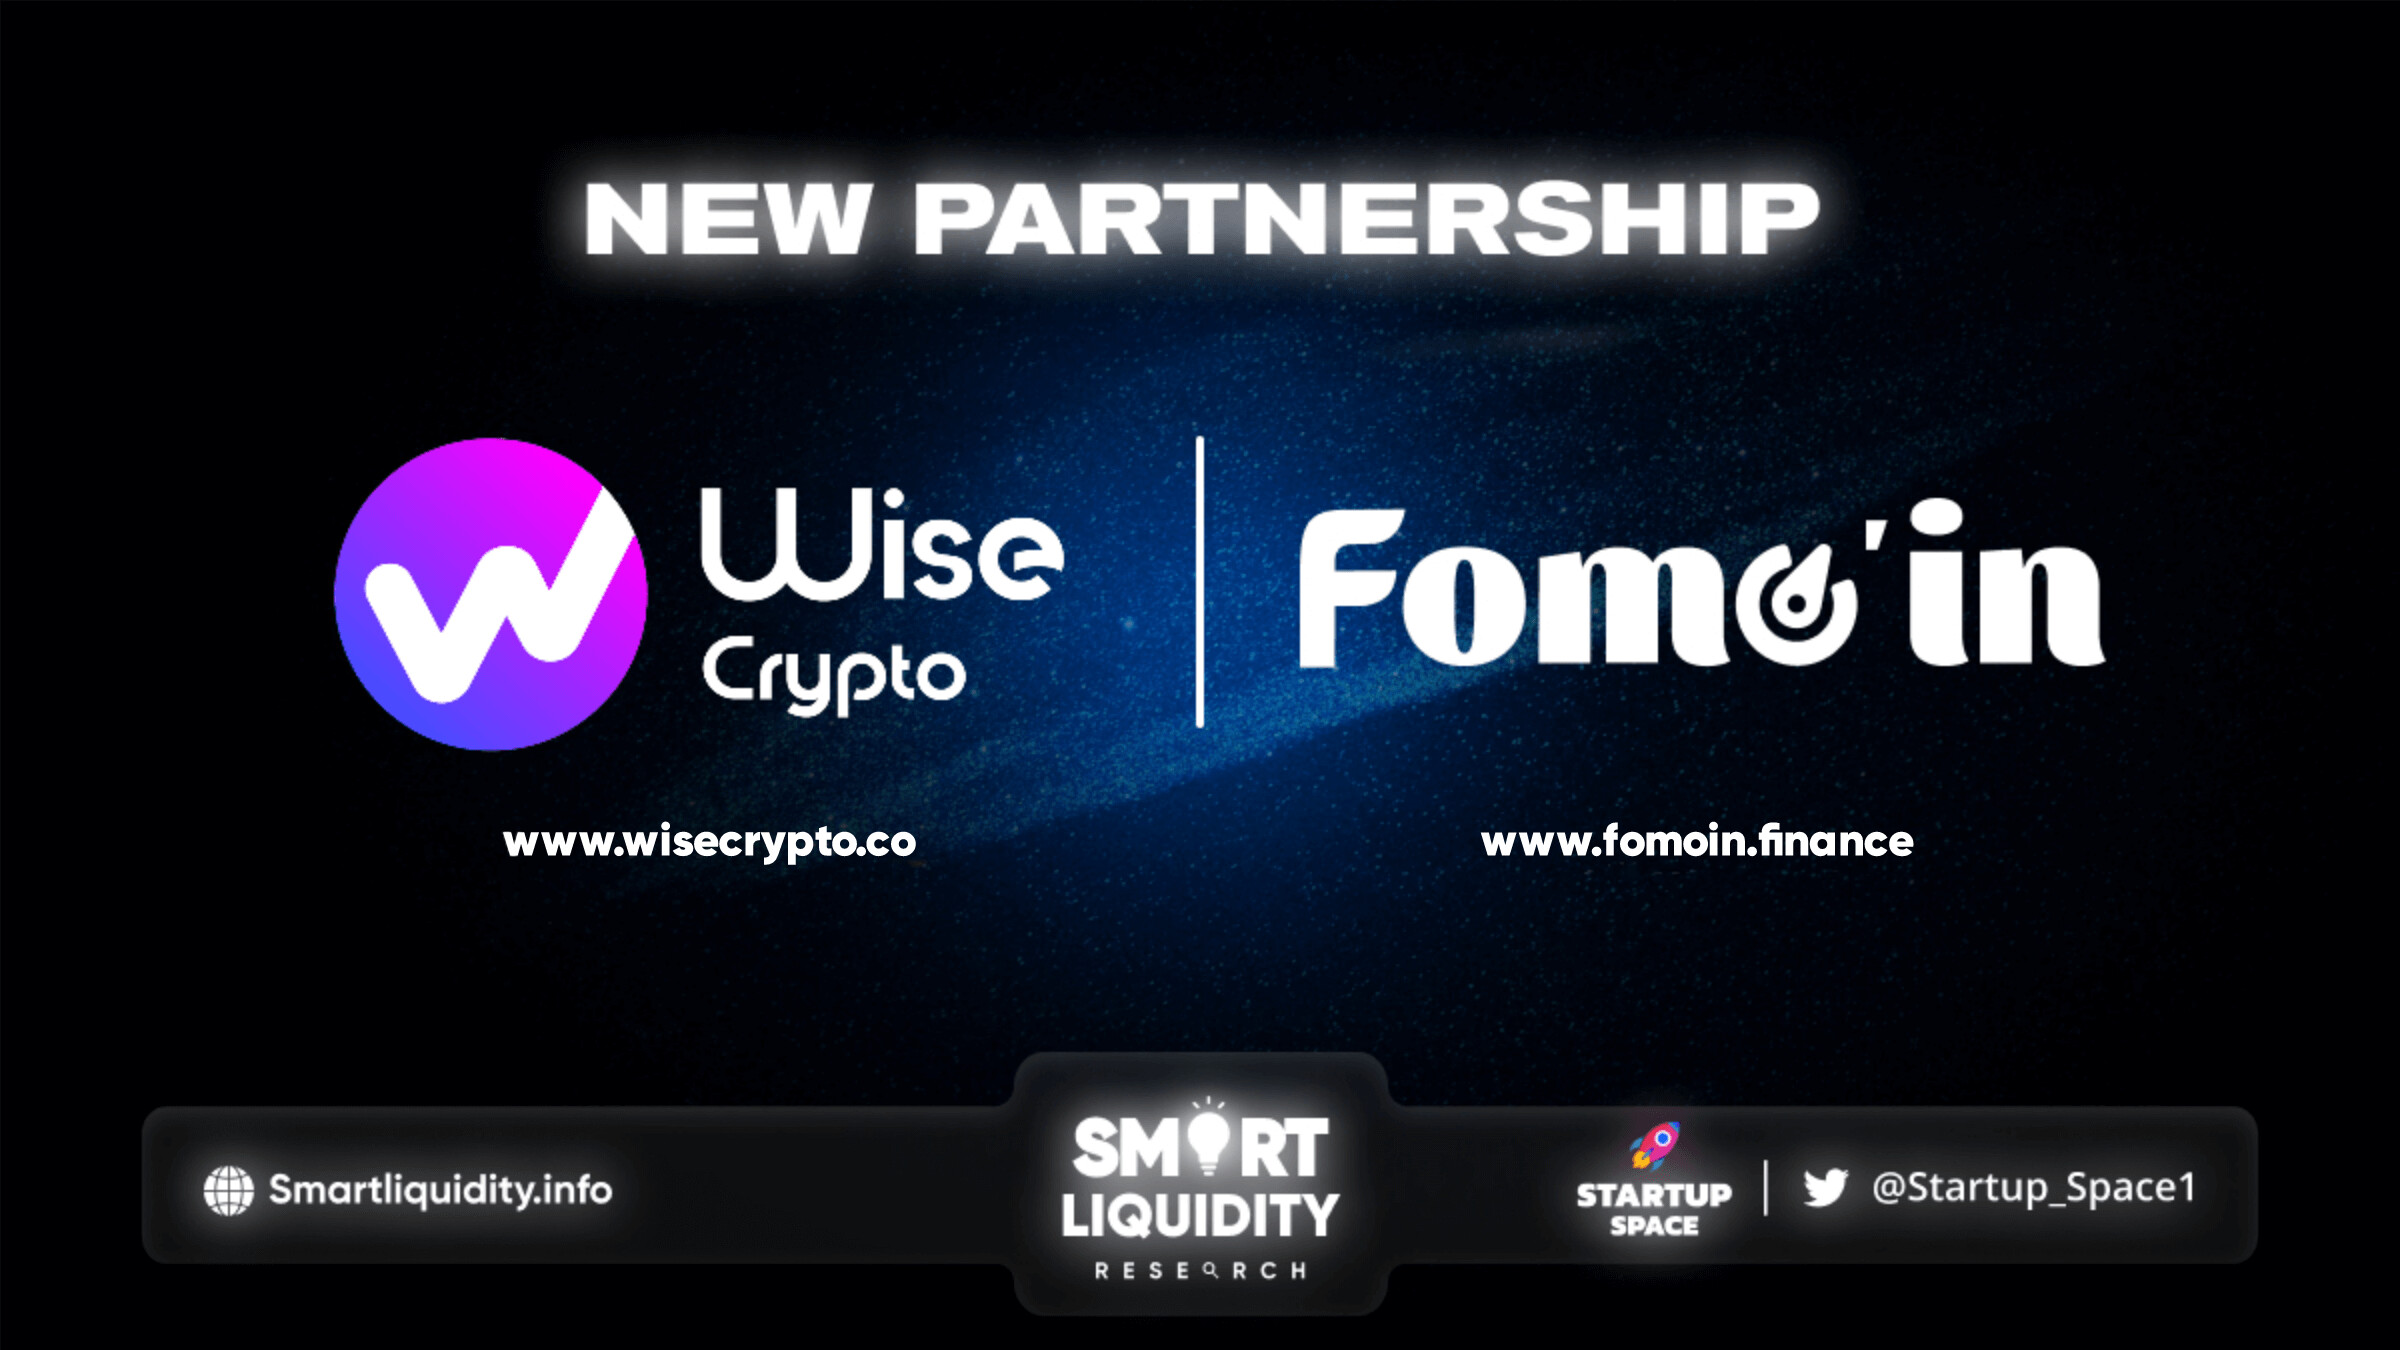 Wise Crypto New Partnership with Fomoin